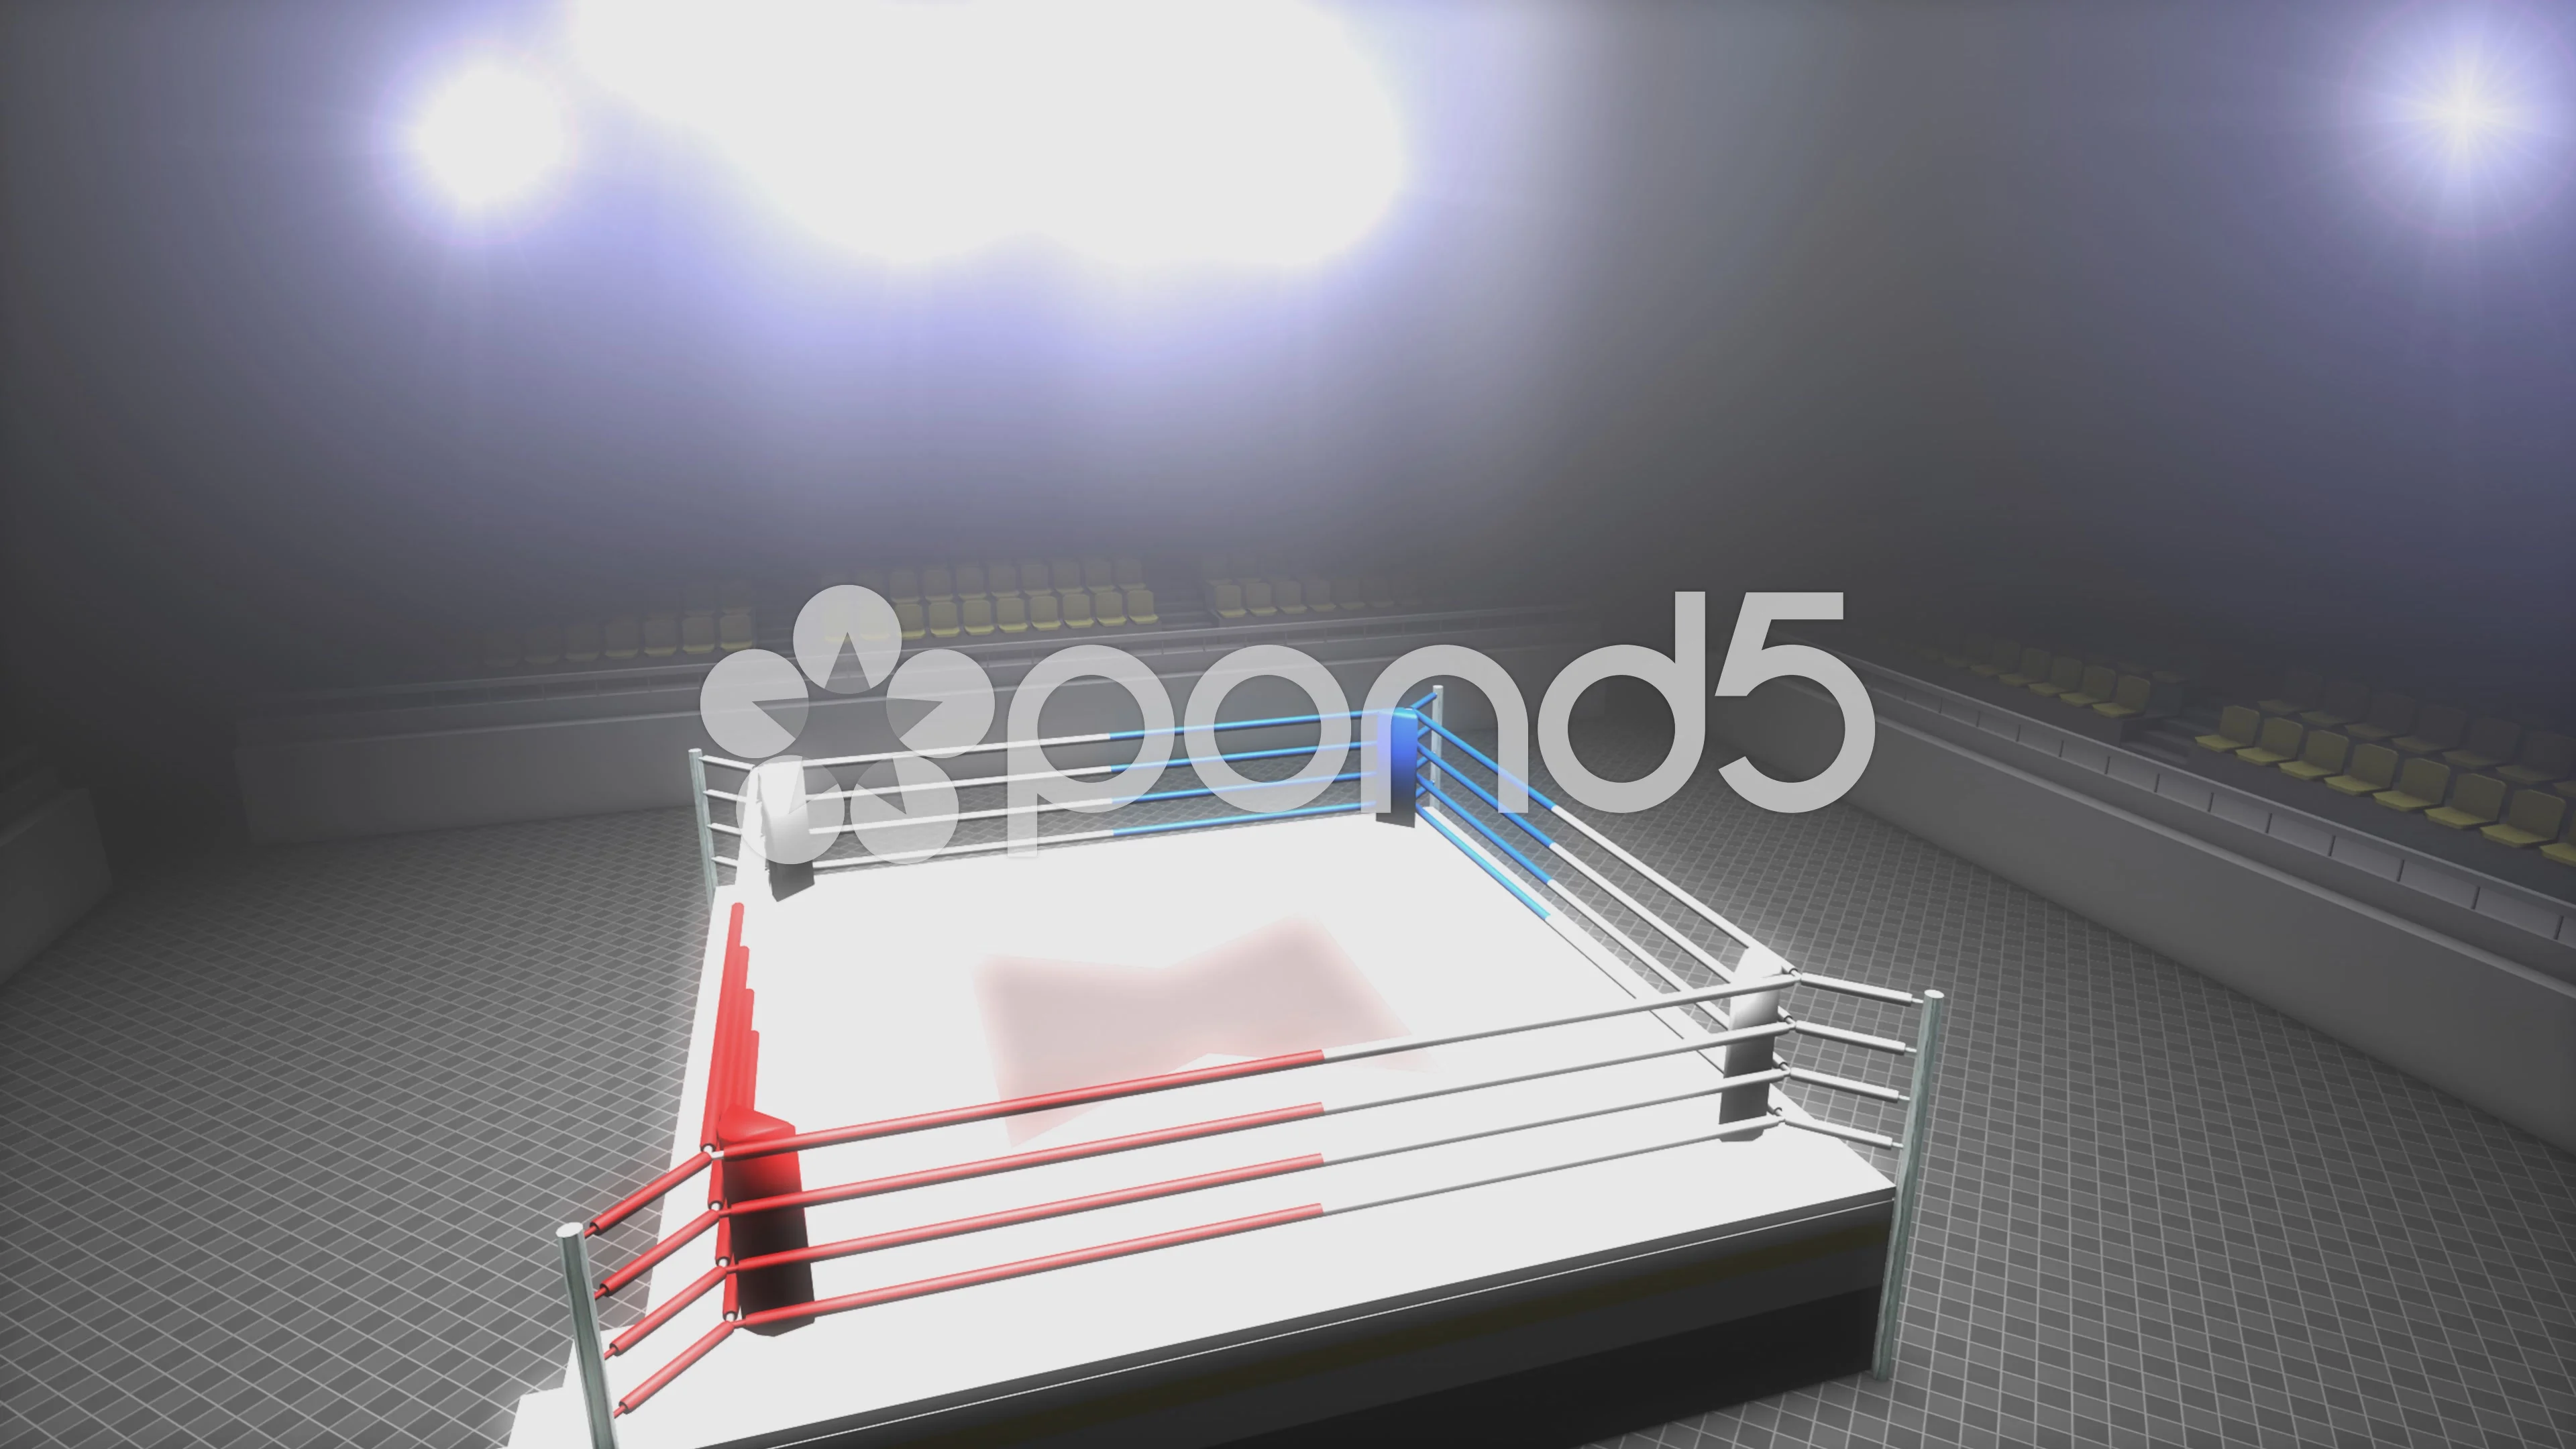 Empty boxing ring in sport arena. | Stock Video | Pond5